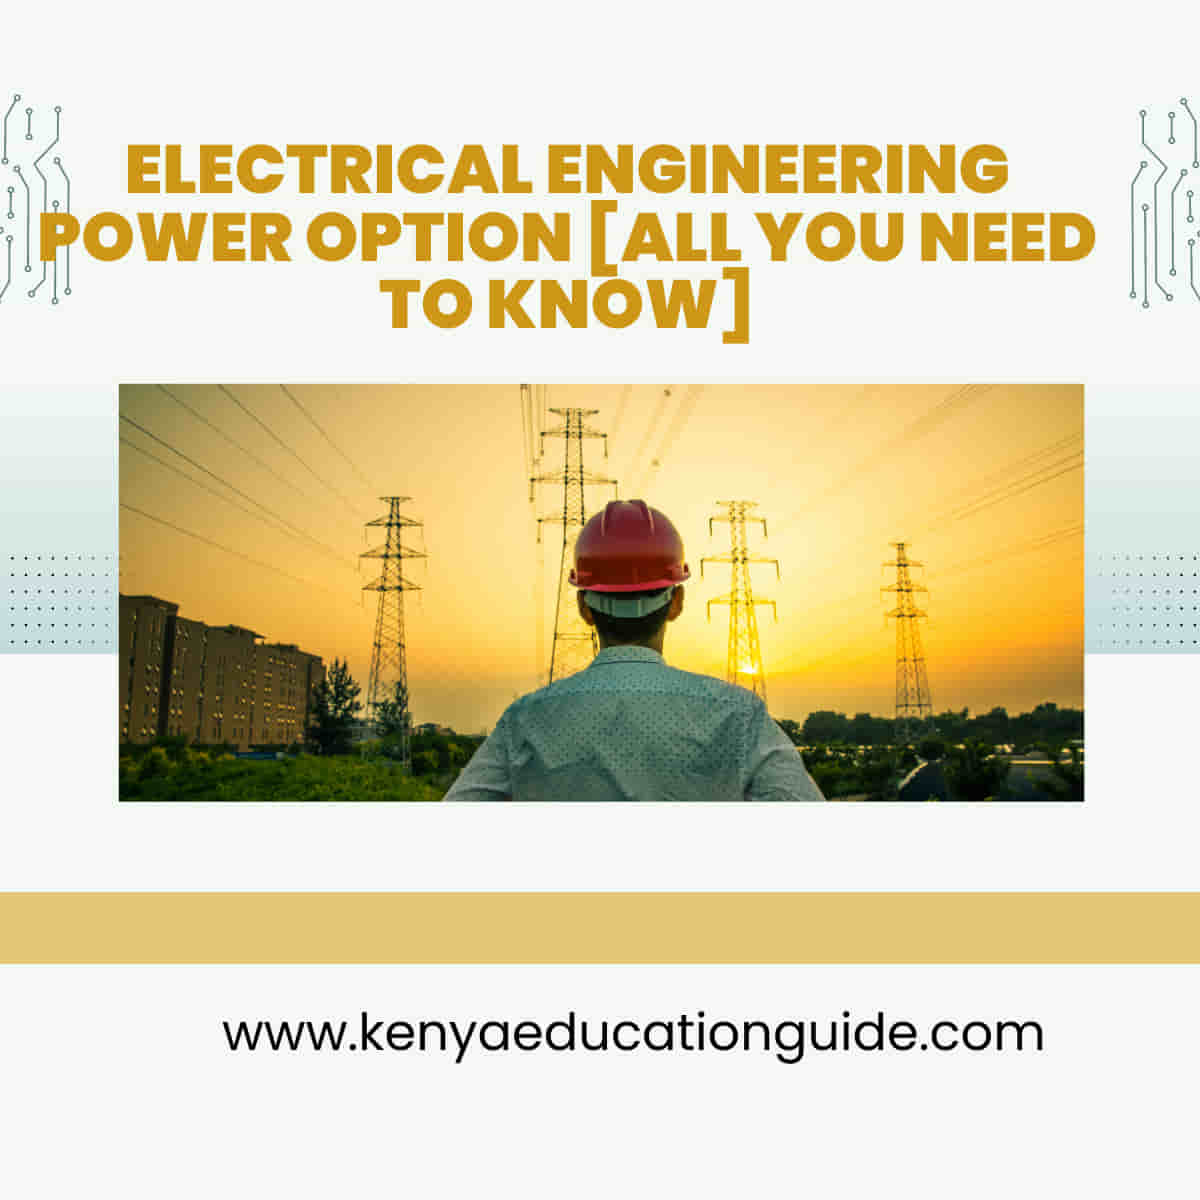 Electrical engineering power option